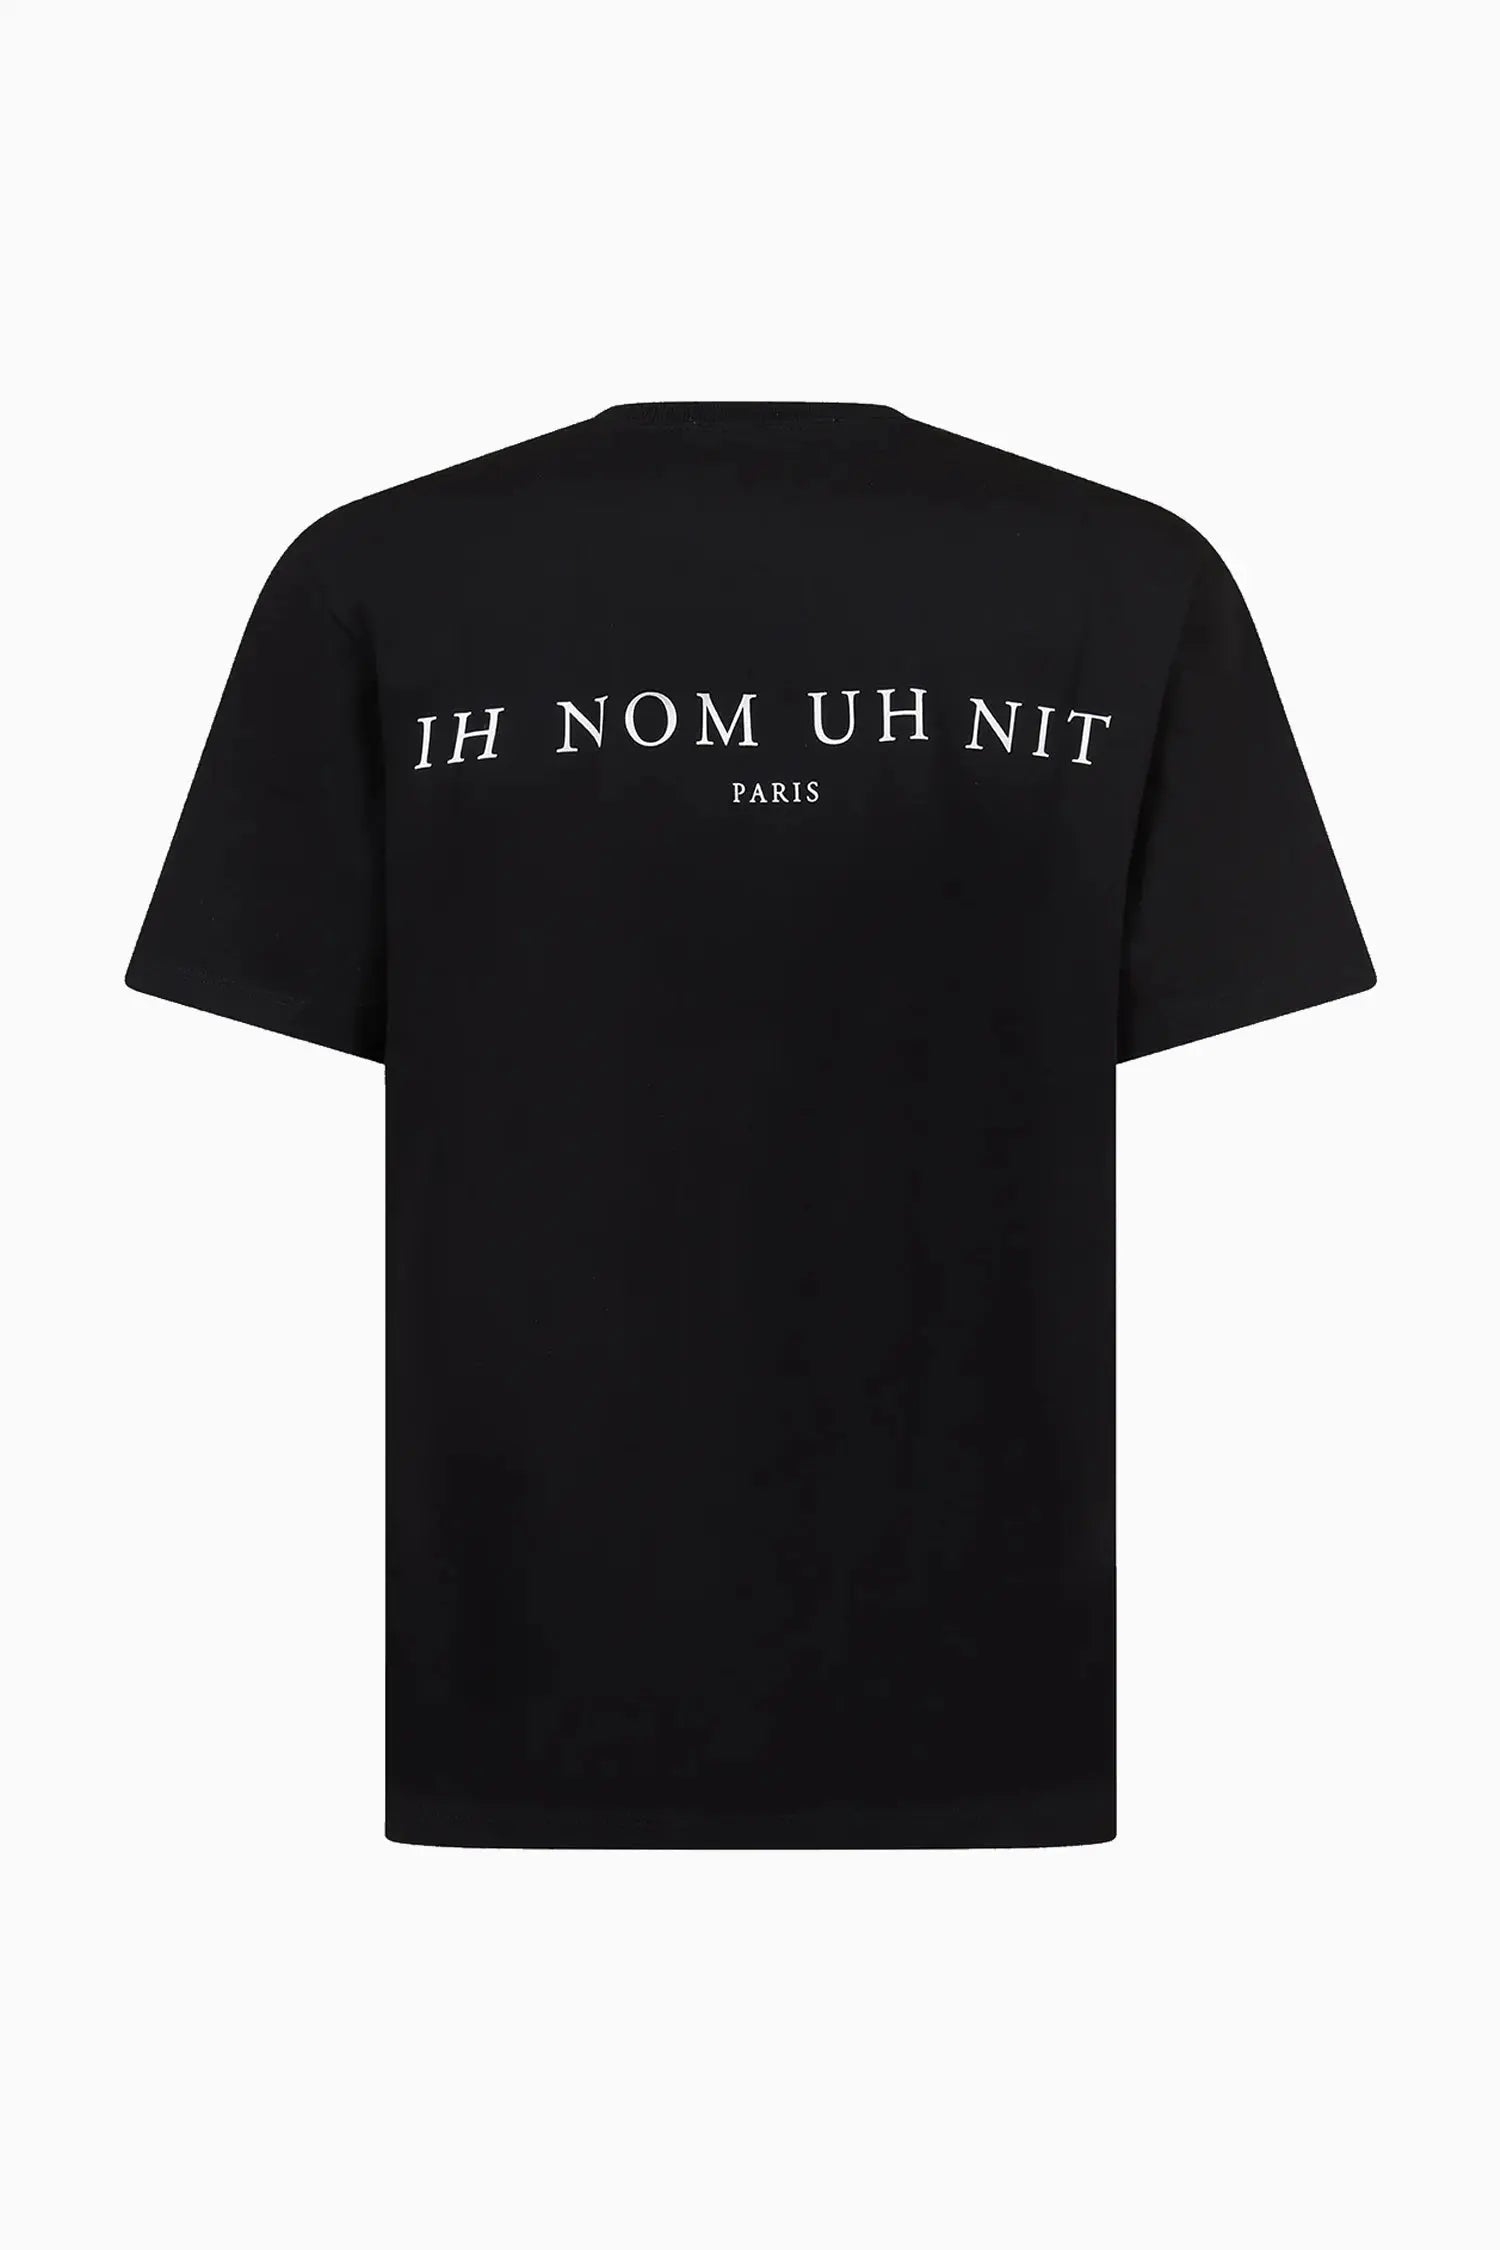 Ih Nom Uh Nit, Discover our new collection – IH NOM UH NIT